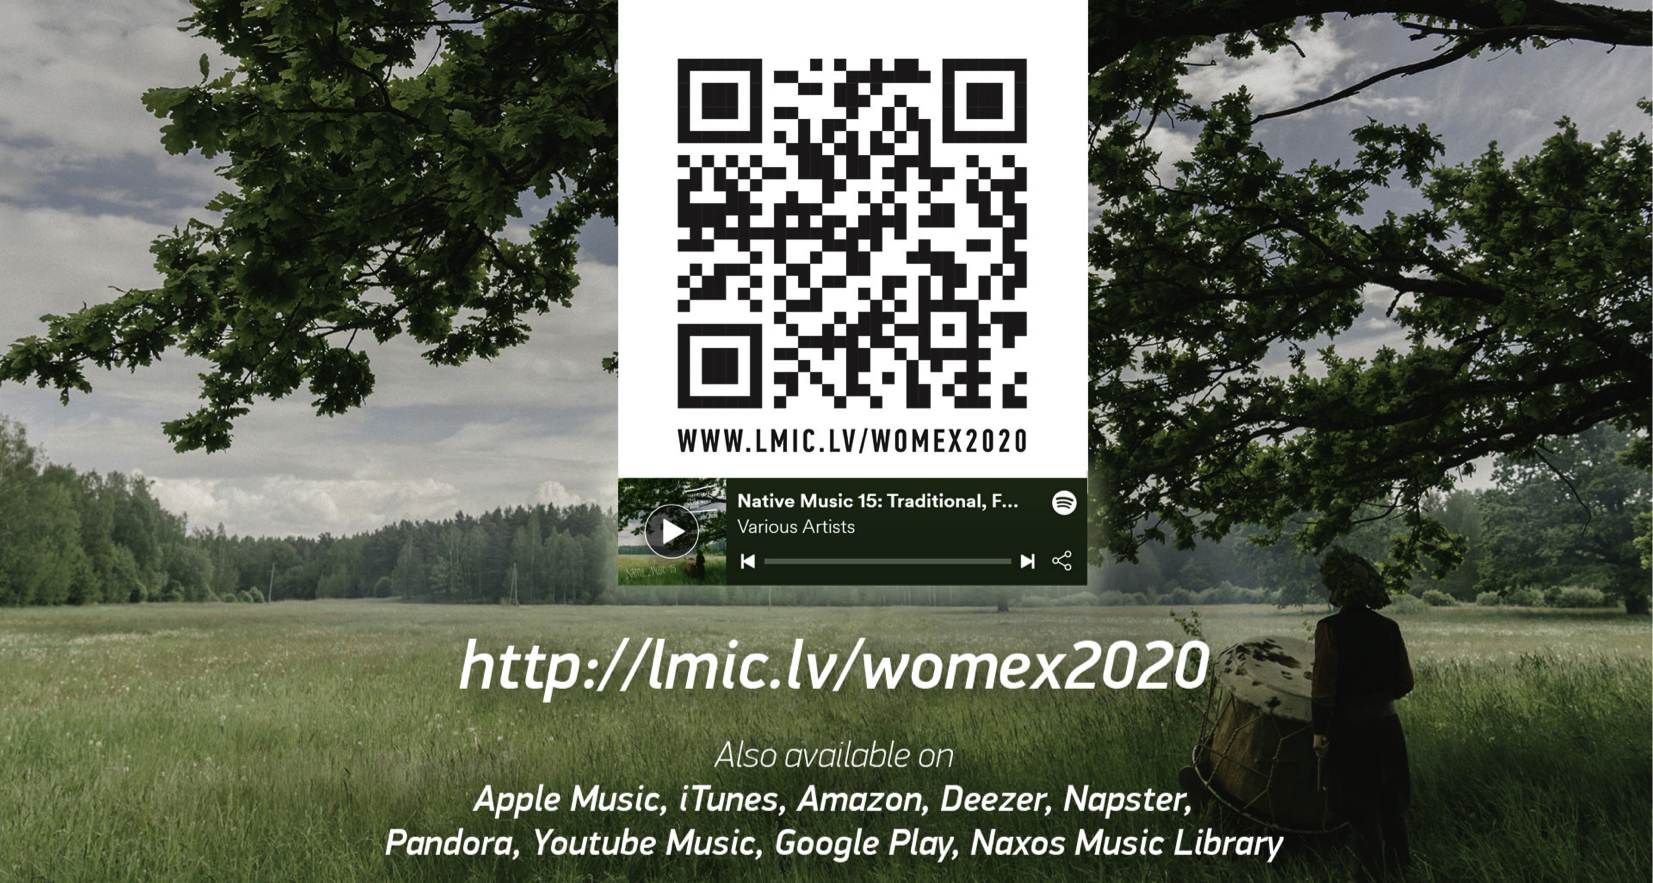 Latvian Music Information Centre is taking part in the digital World Music Expo WOMEX